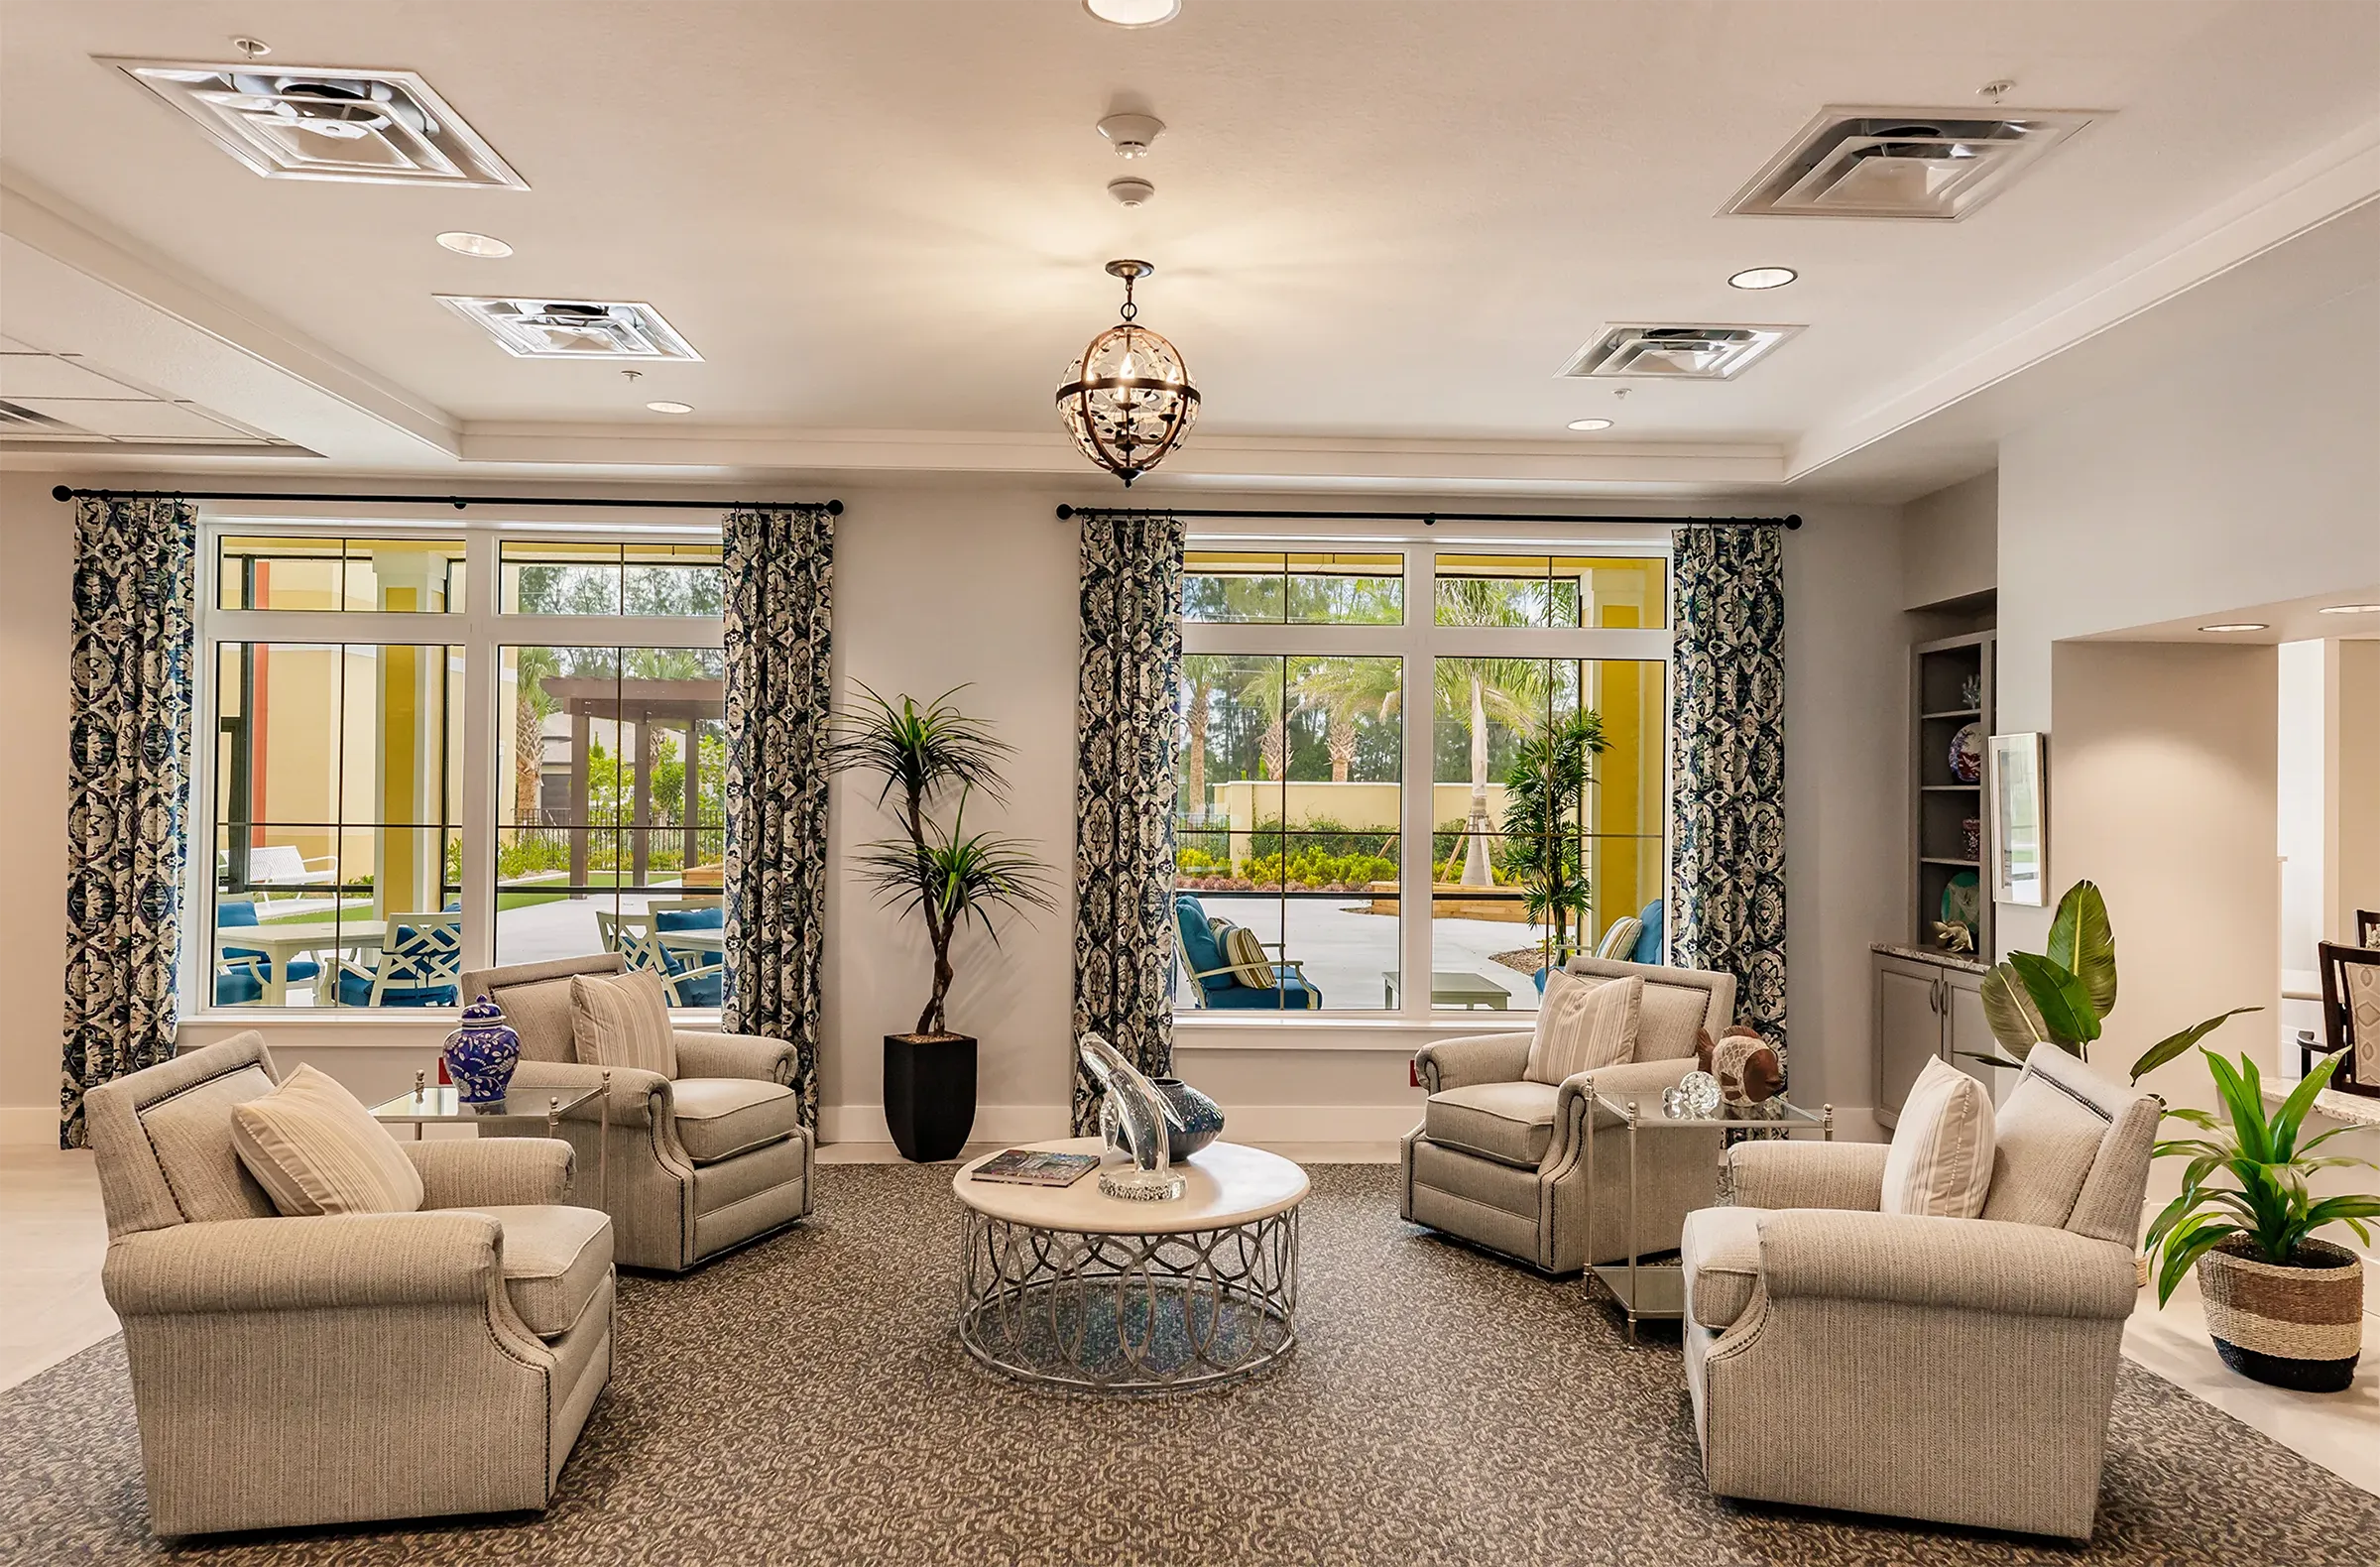 A community living room at The Gallery at Cape Coral.